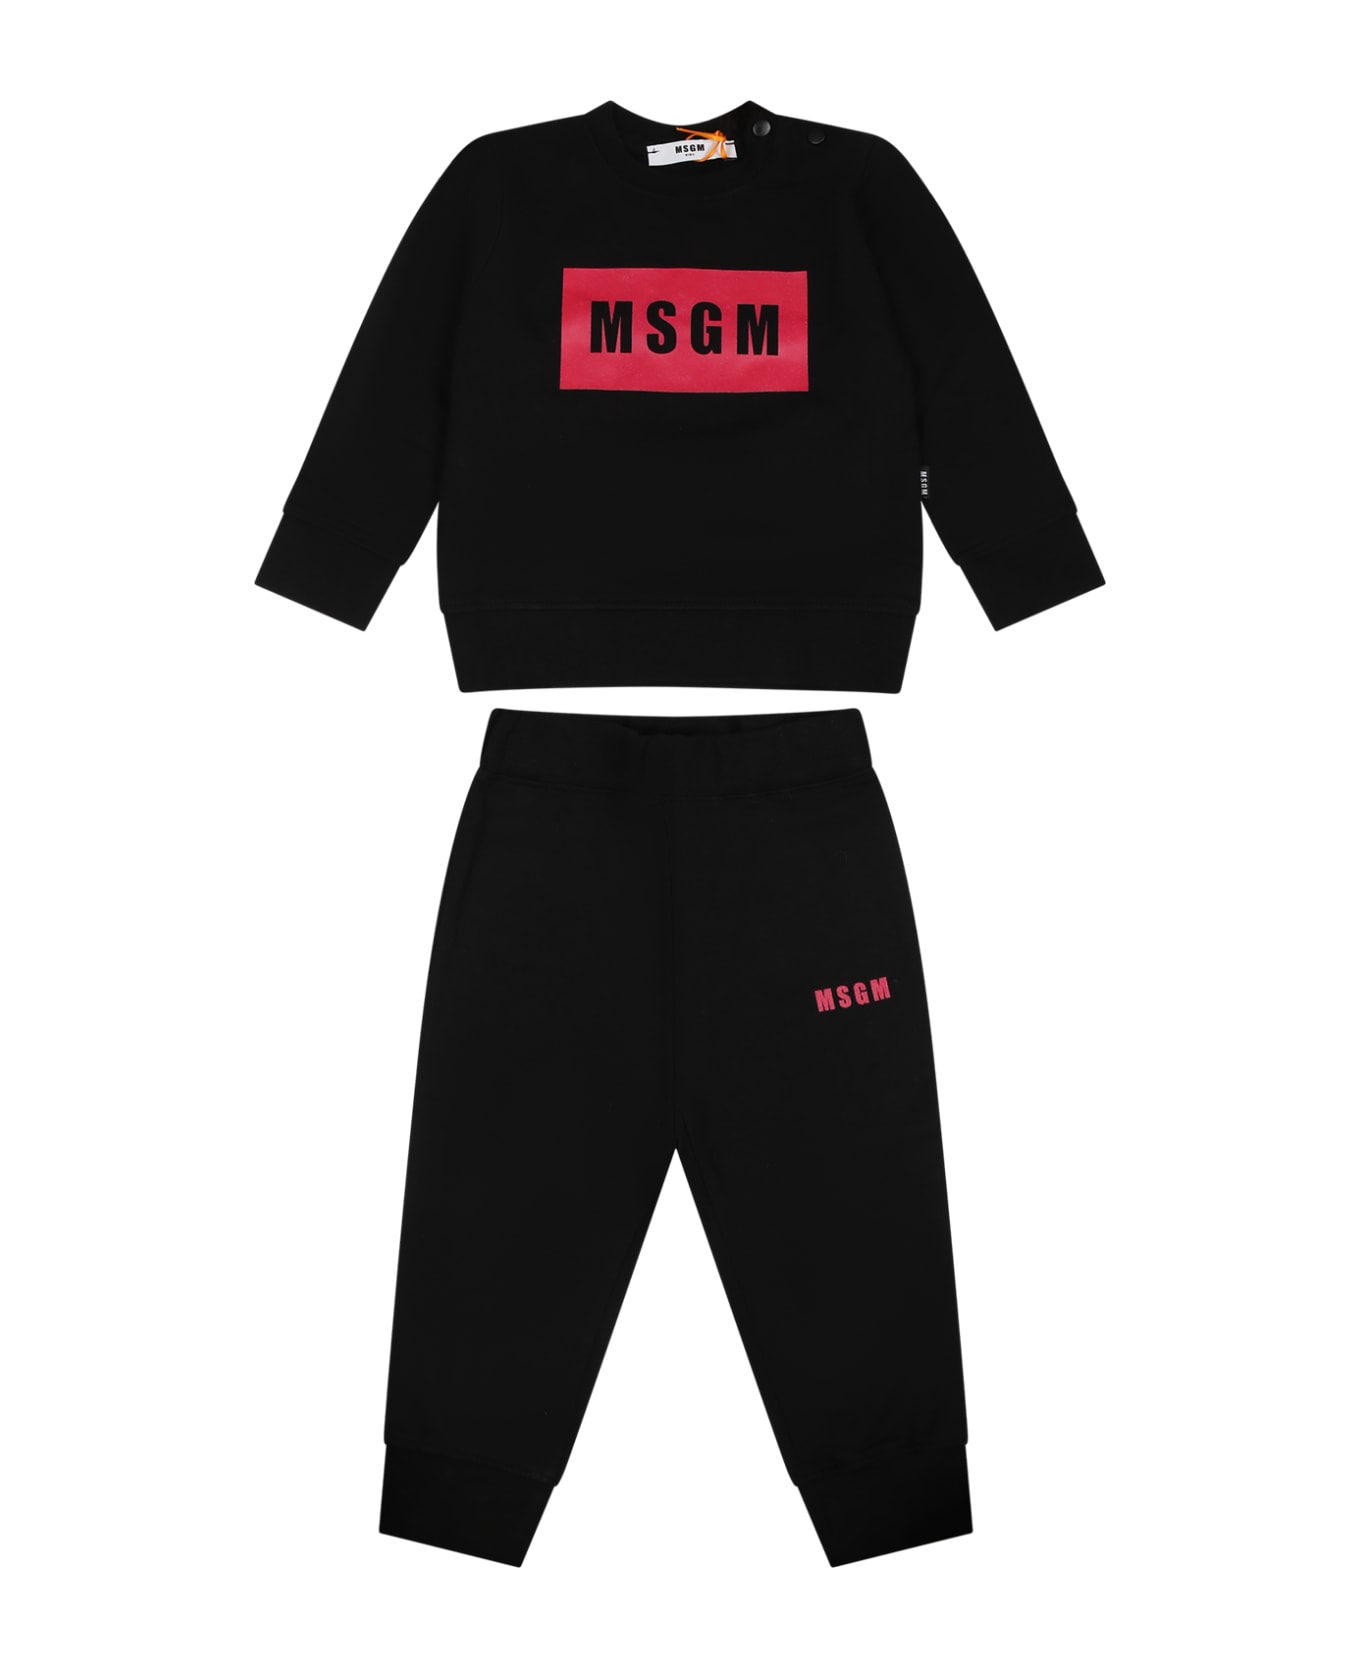 MSGM Black Suit For Baby Girl With Logo - Black